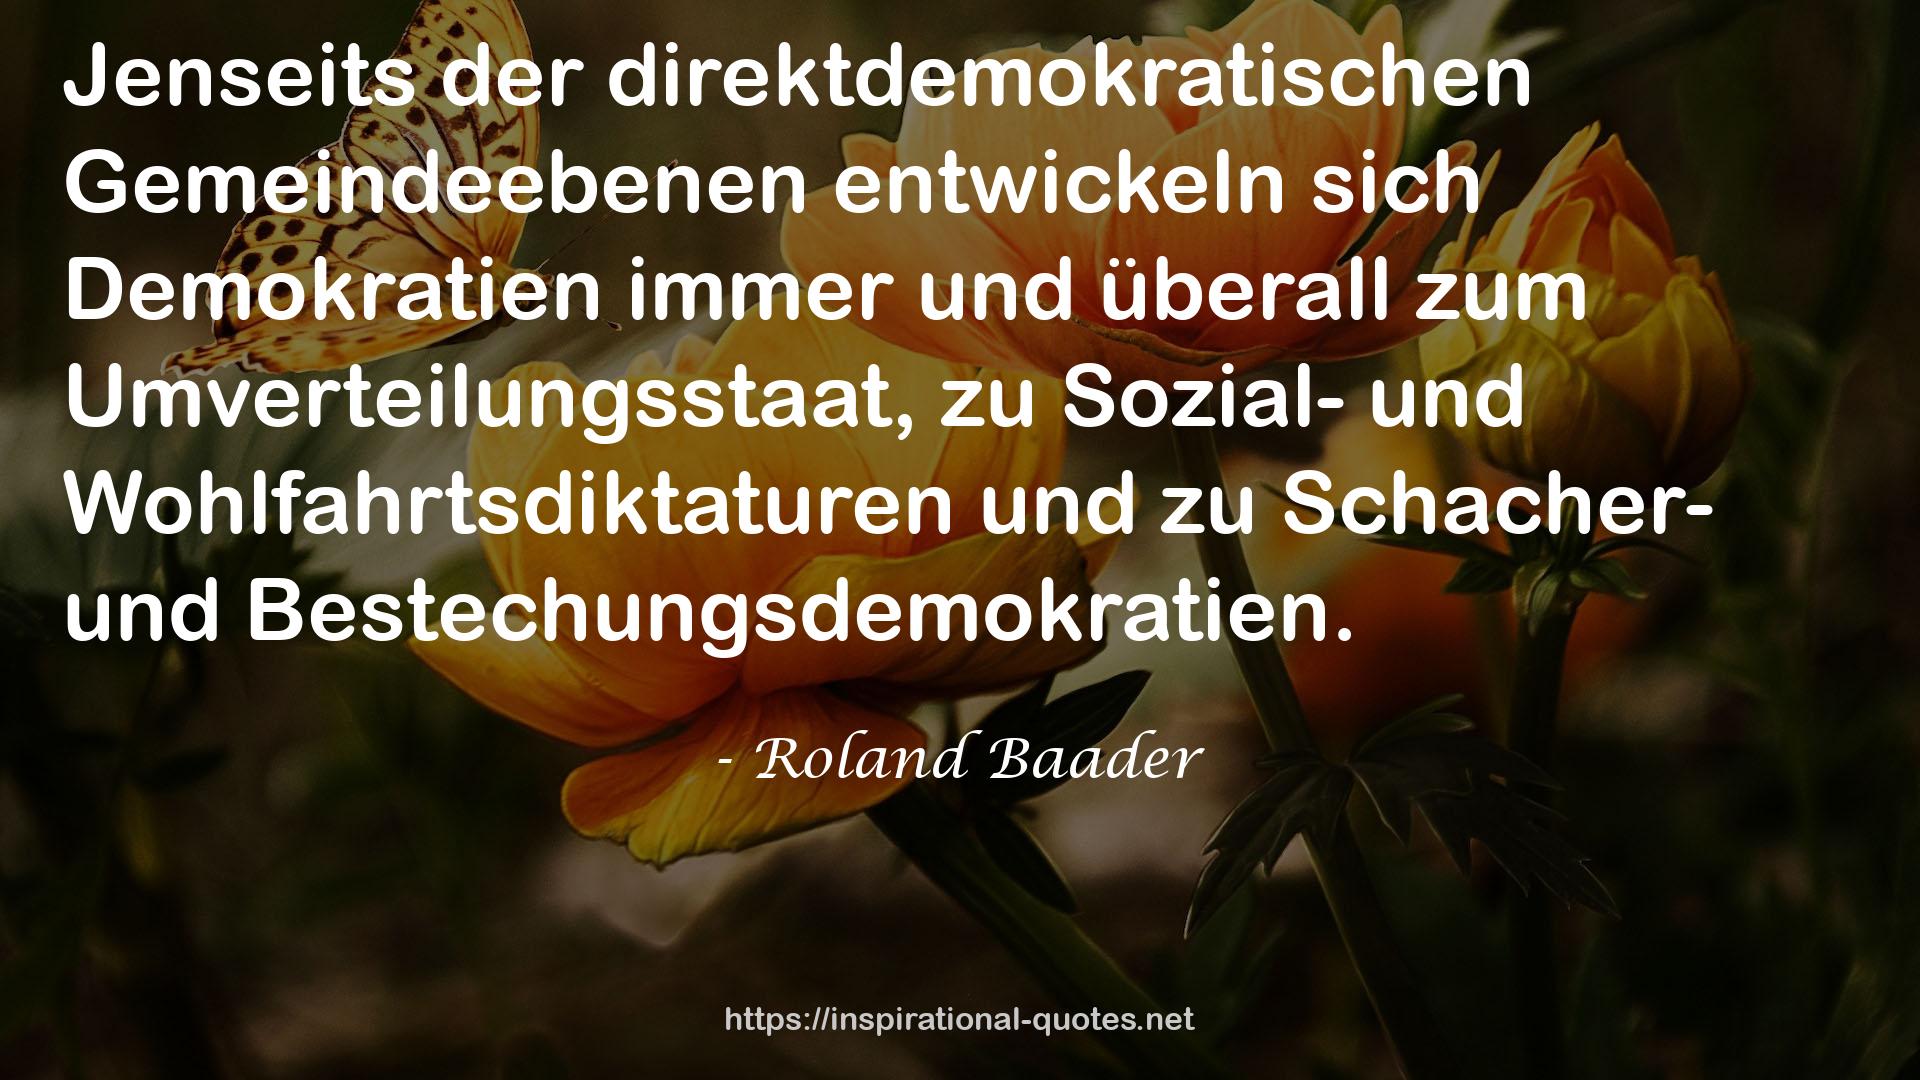 Roland Baader QUOTES